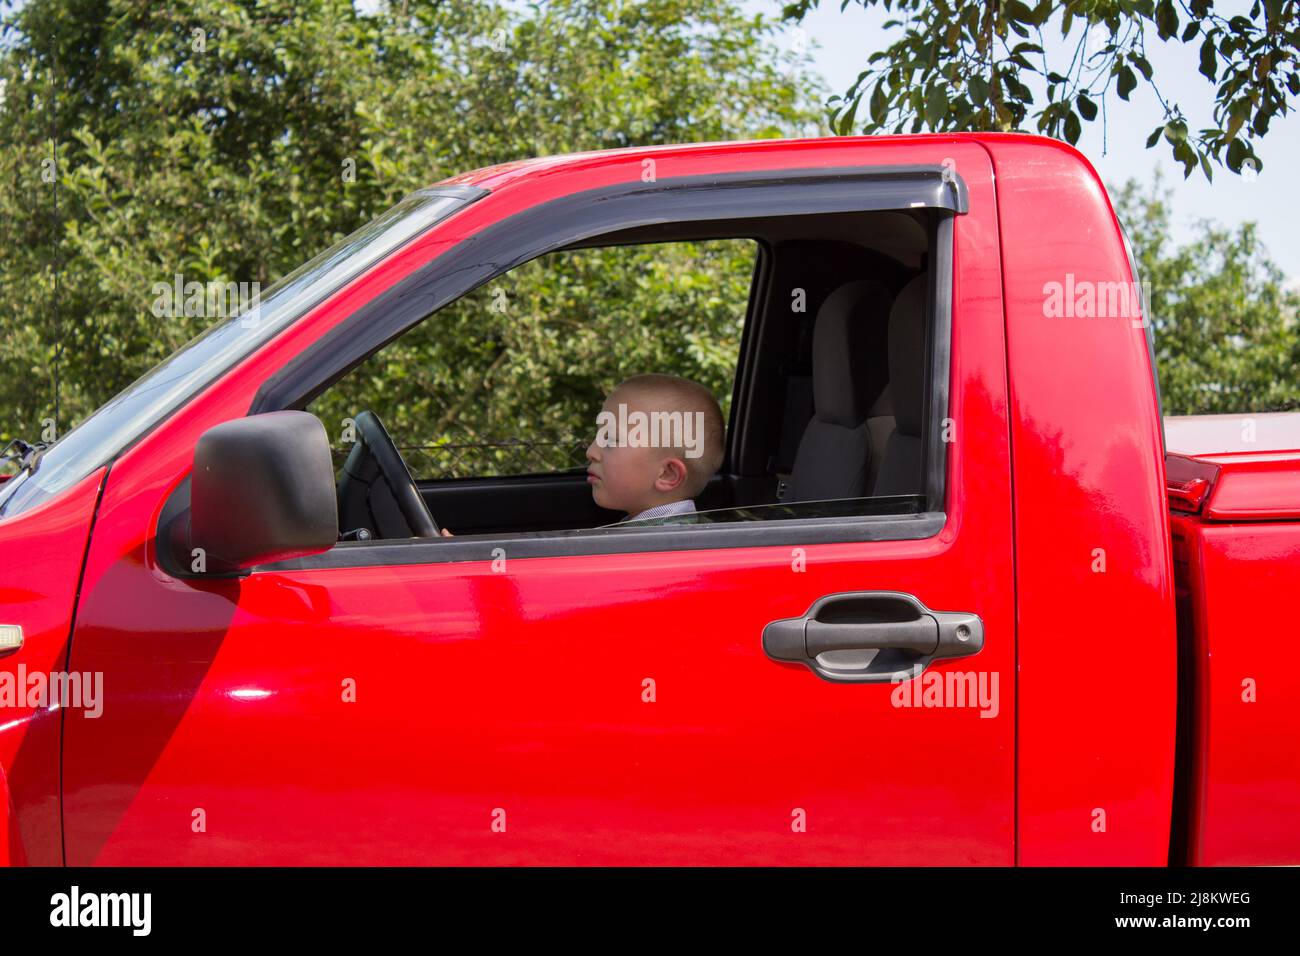 driving a red pickup truck sitting boy Stock Photo